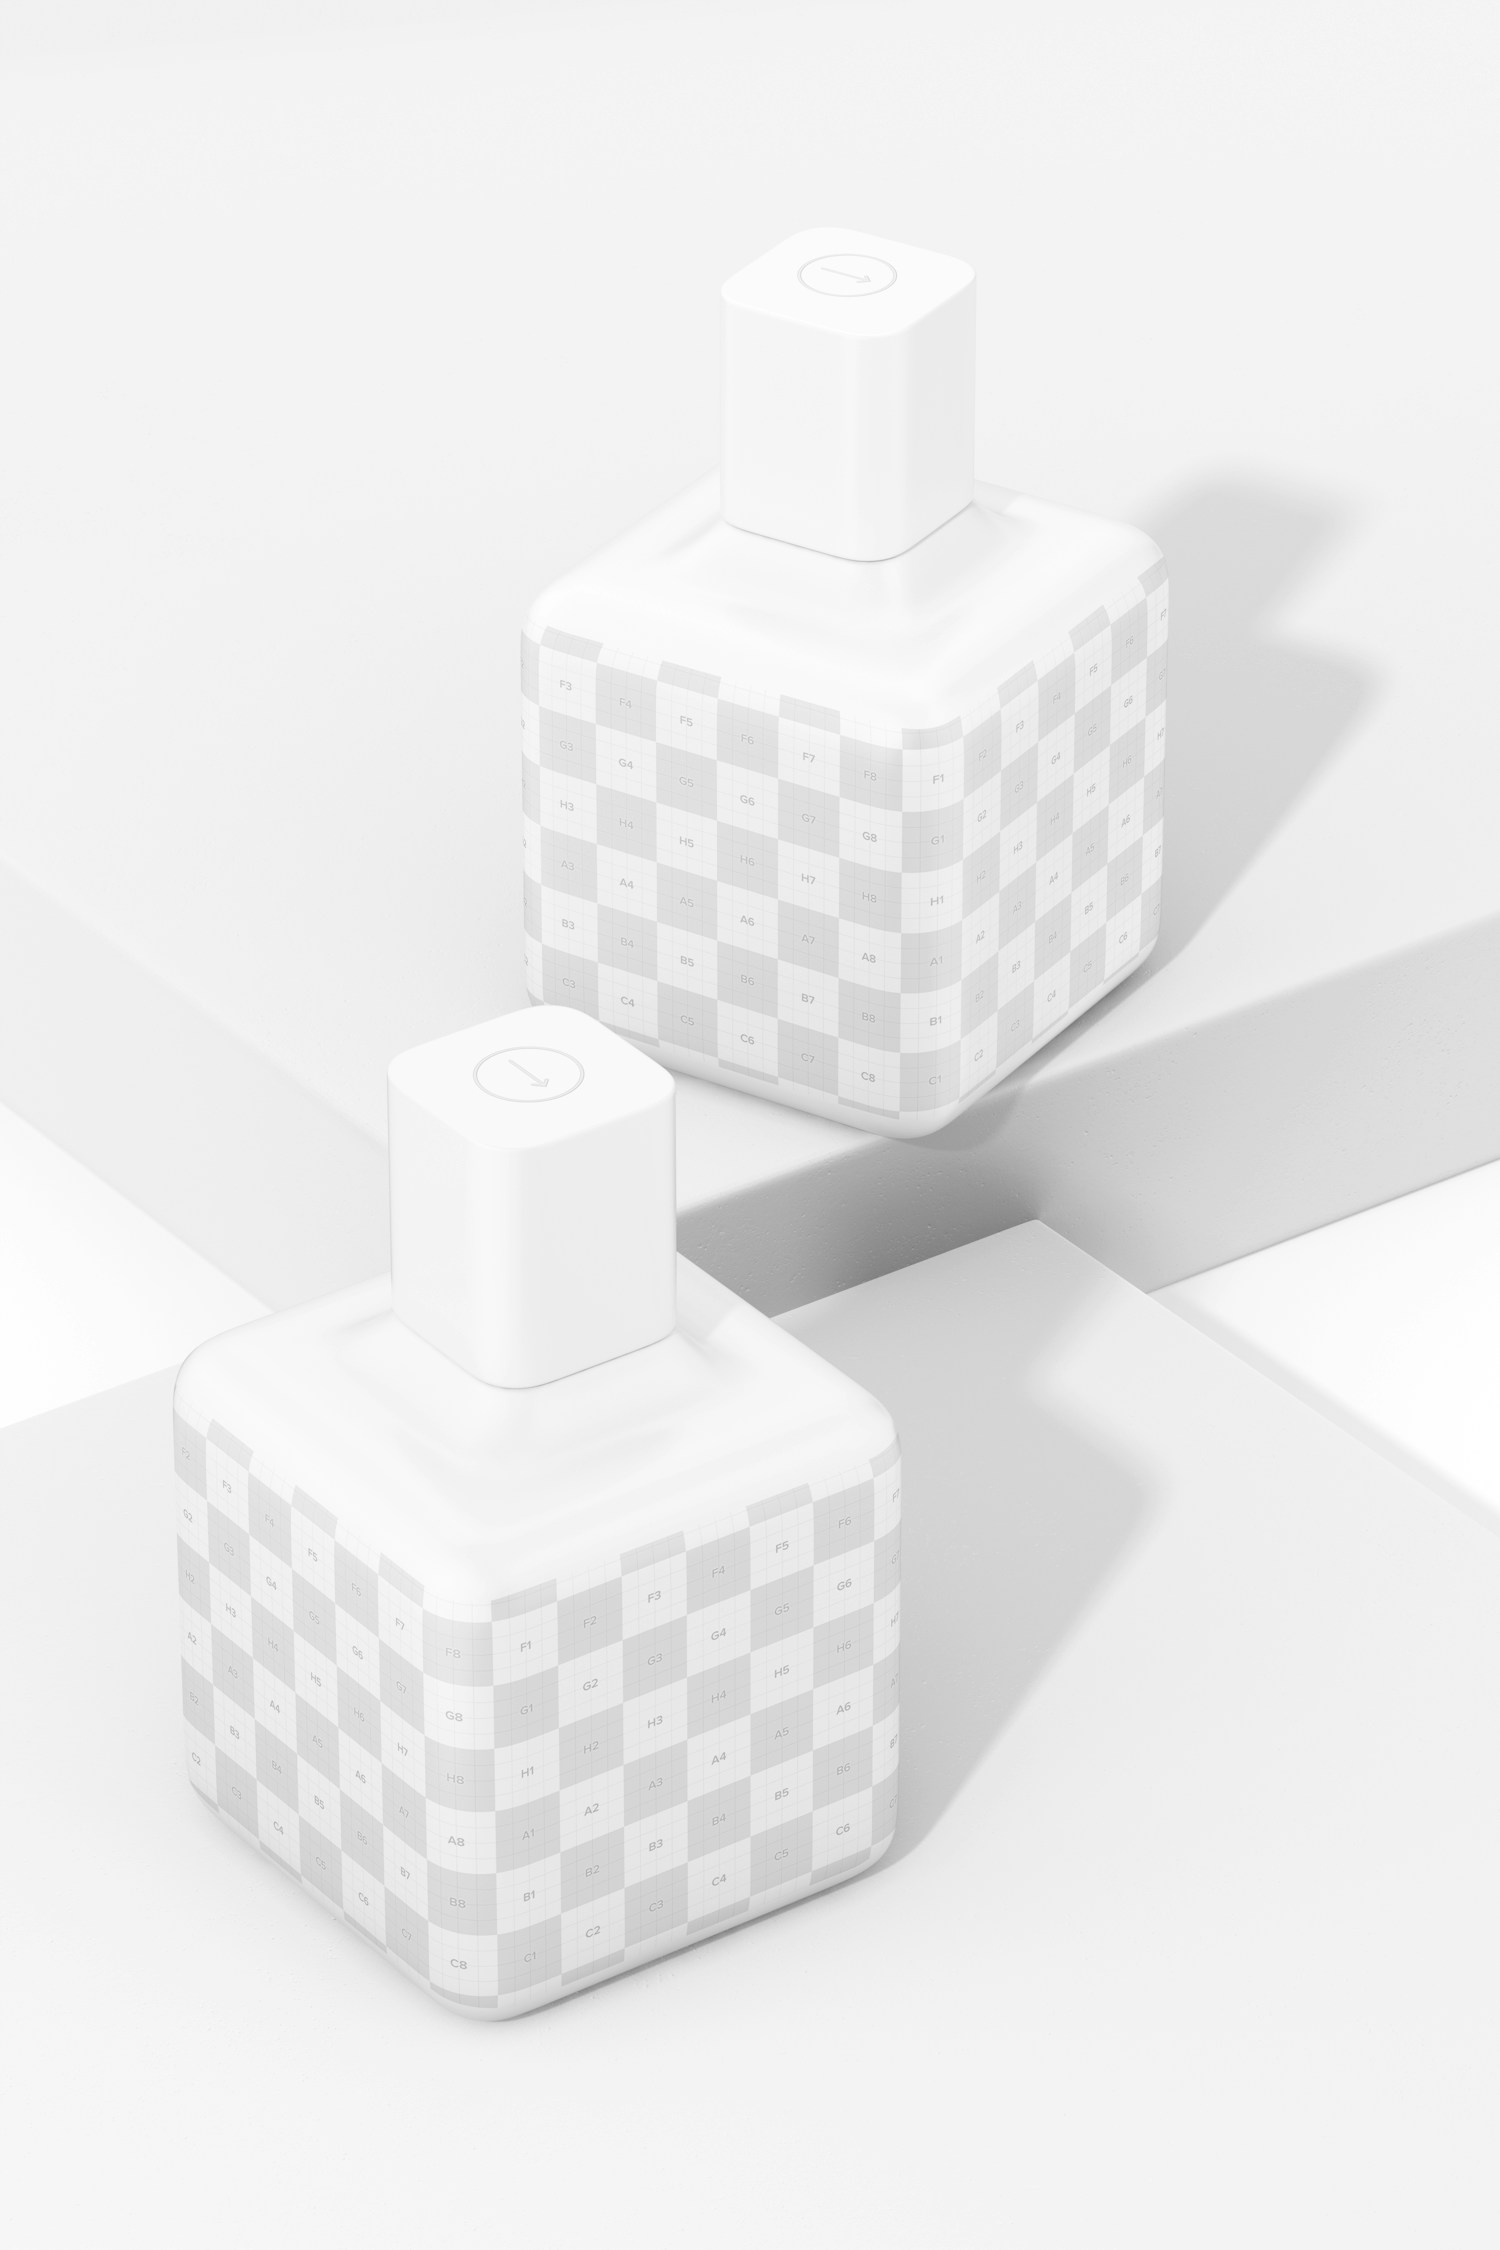 200 ml Square Lotion Bottle Mockup, Perspective